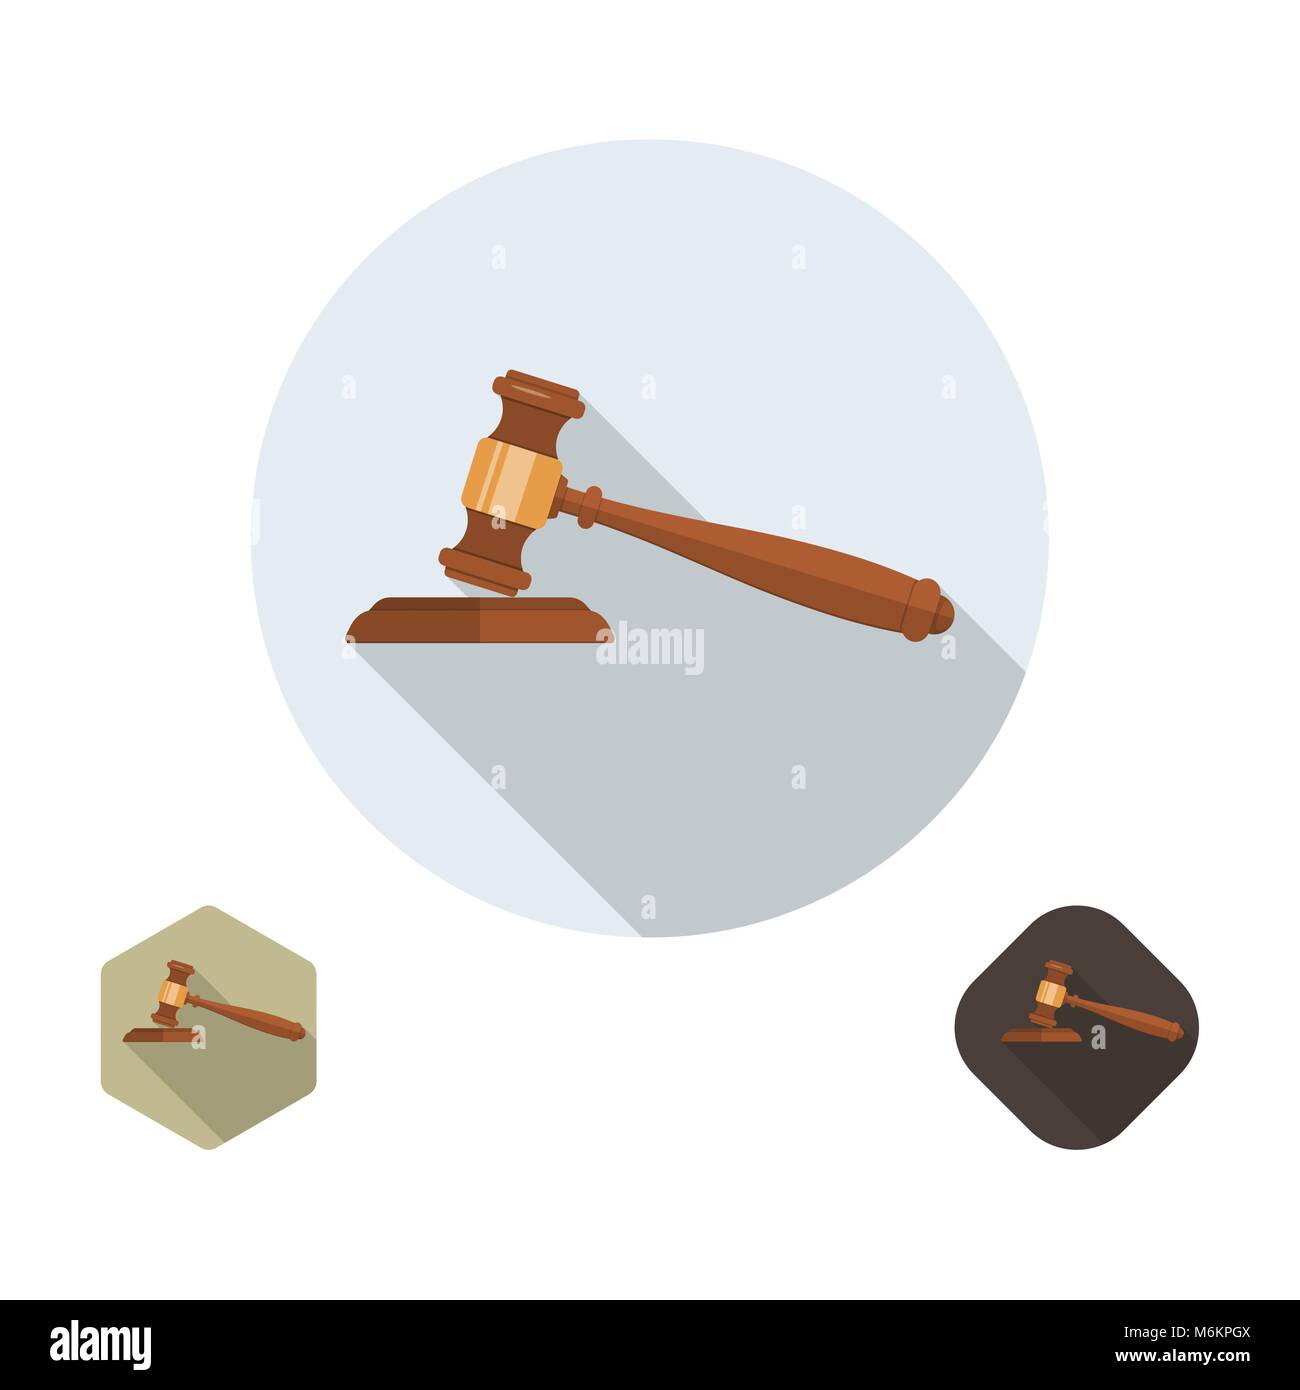 Gavel icon. Auction hammer sign. Shadow. Flat design. Vector illustration for your design Stock Vector